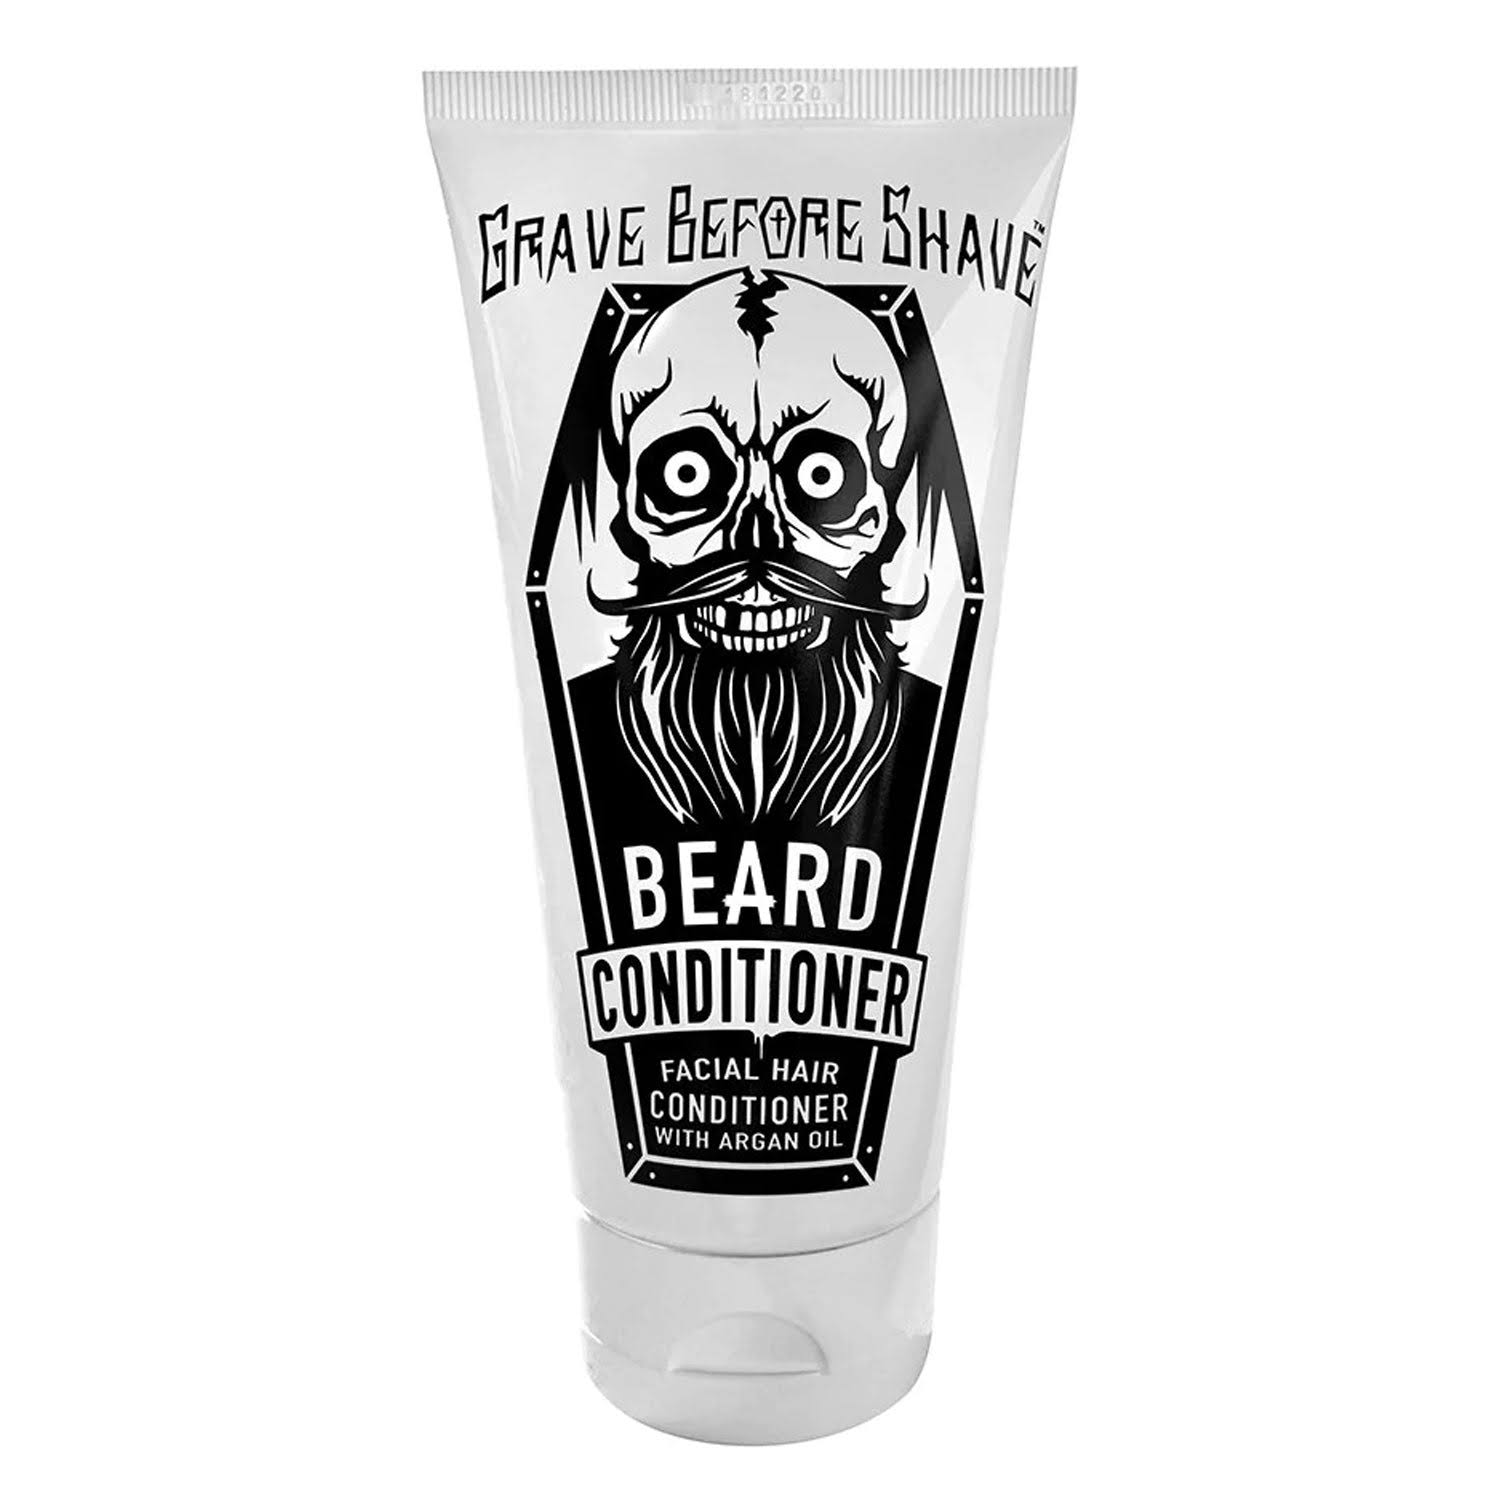 Grave Before Shave Beard Growth Supplement - 60ct